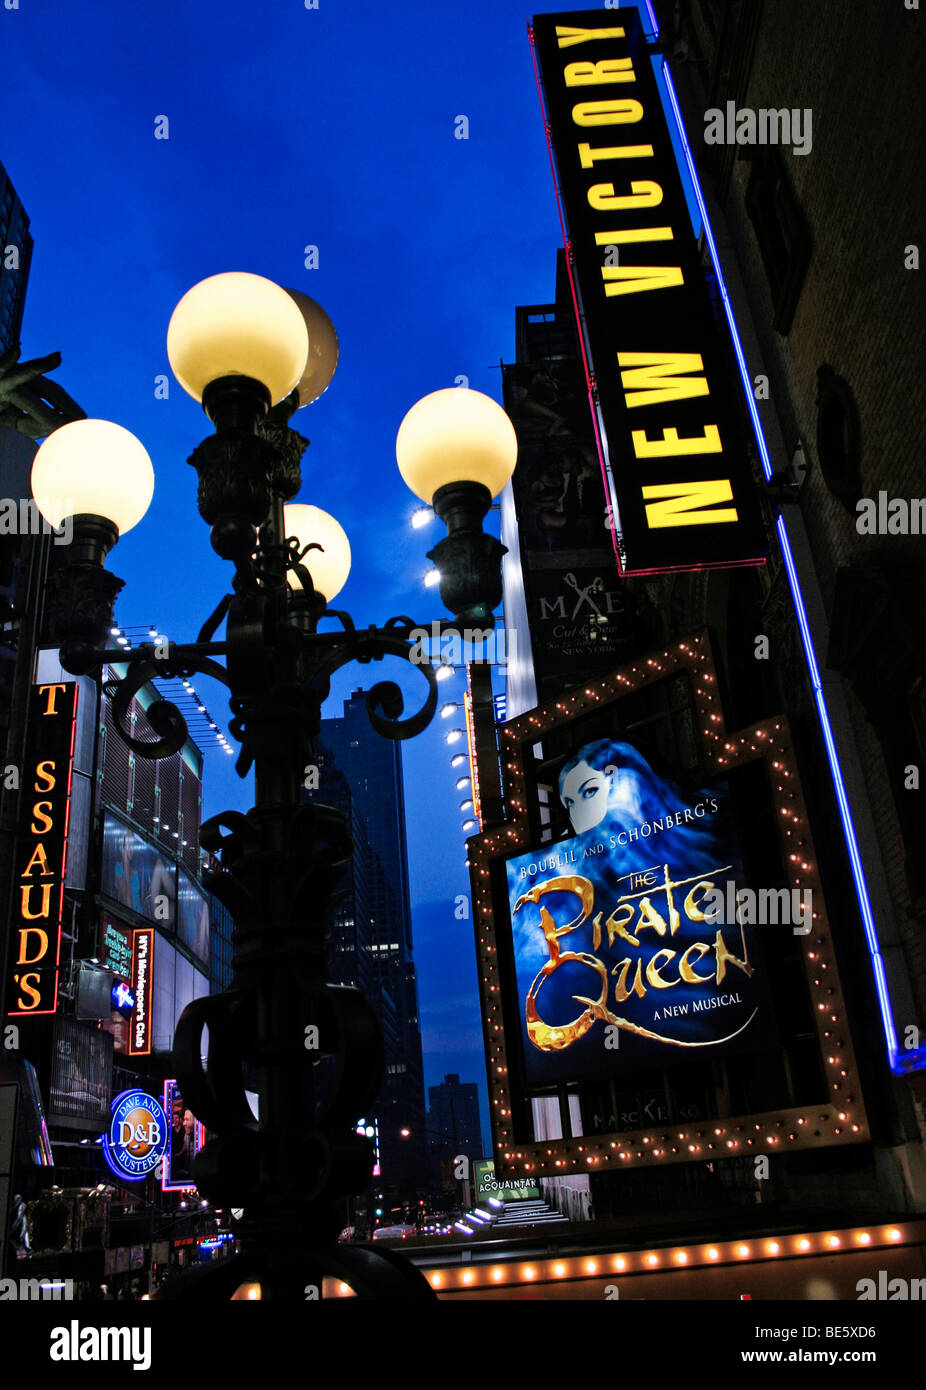 Neon sign for the musical 'Pirate Queen', near Times Square, Broadway, New York, USA, North America Stock Photo